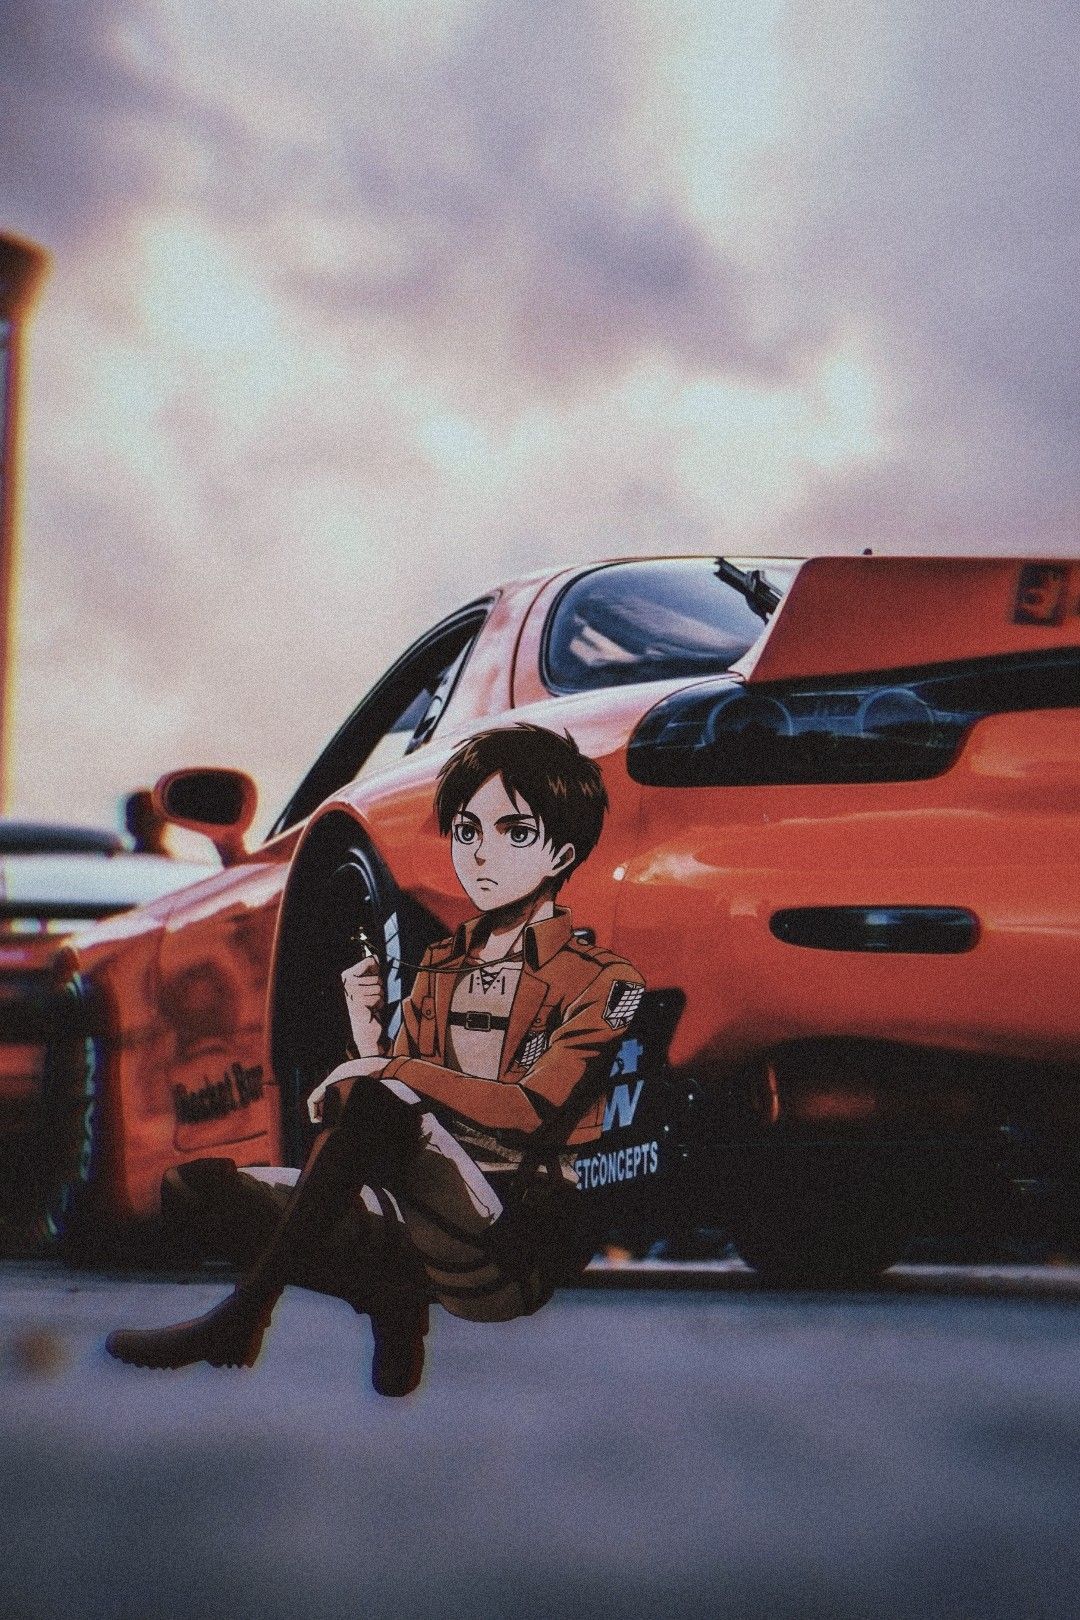 Anime Jdm Cars Wallpapers - Wallpaper Cave